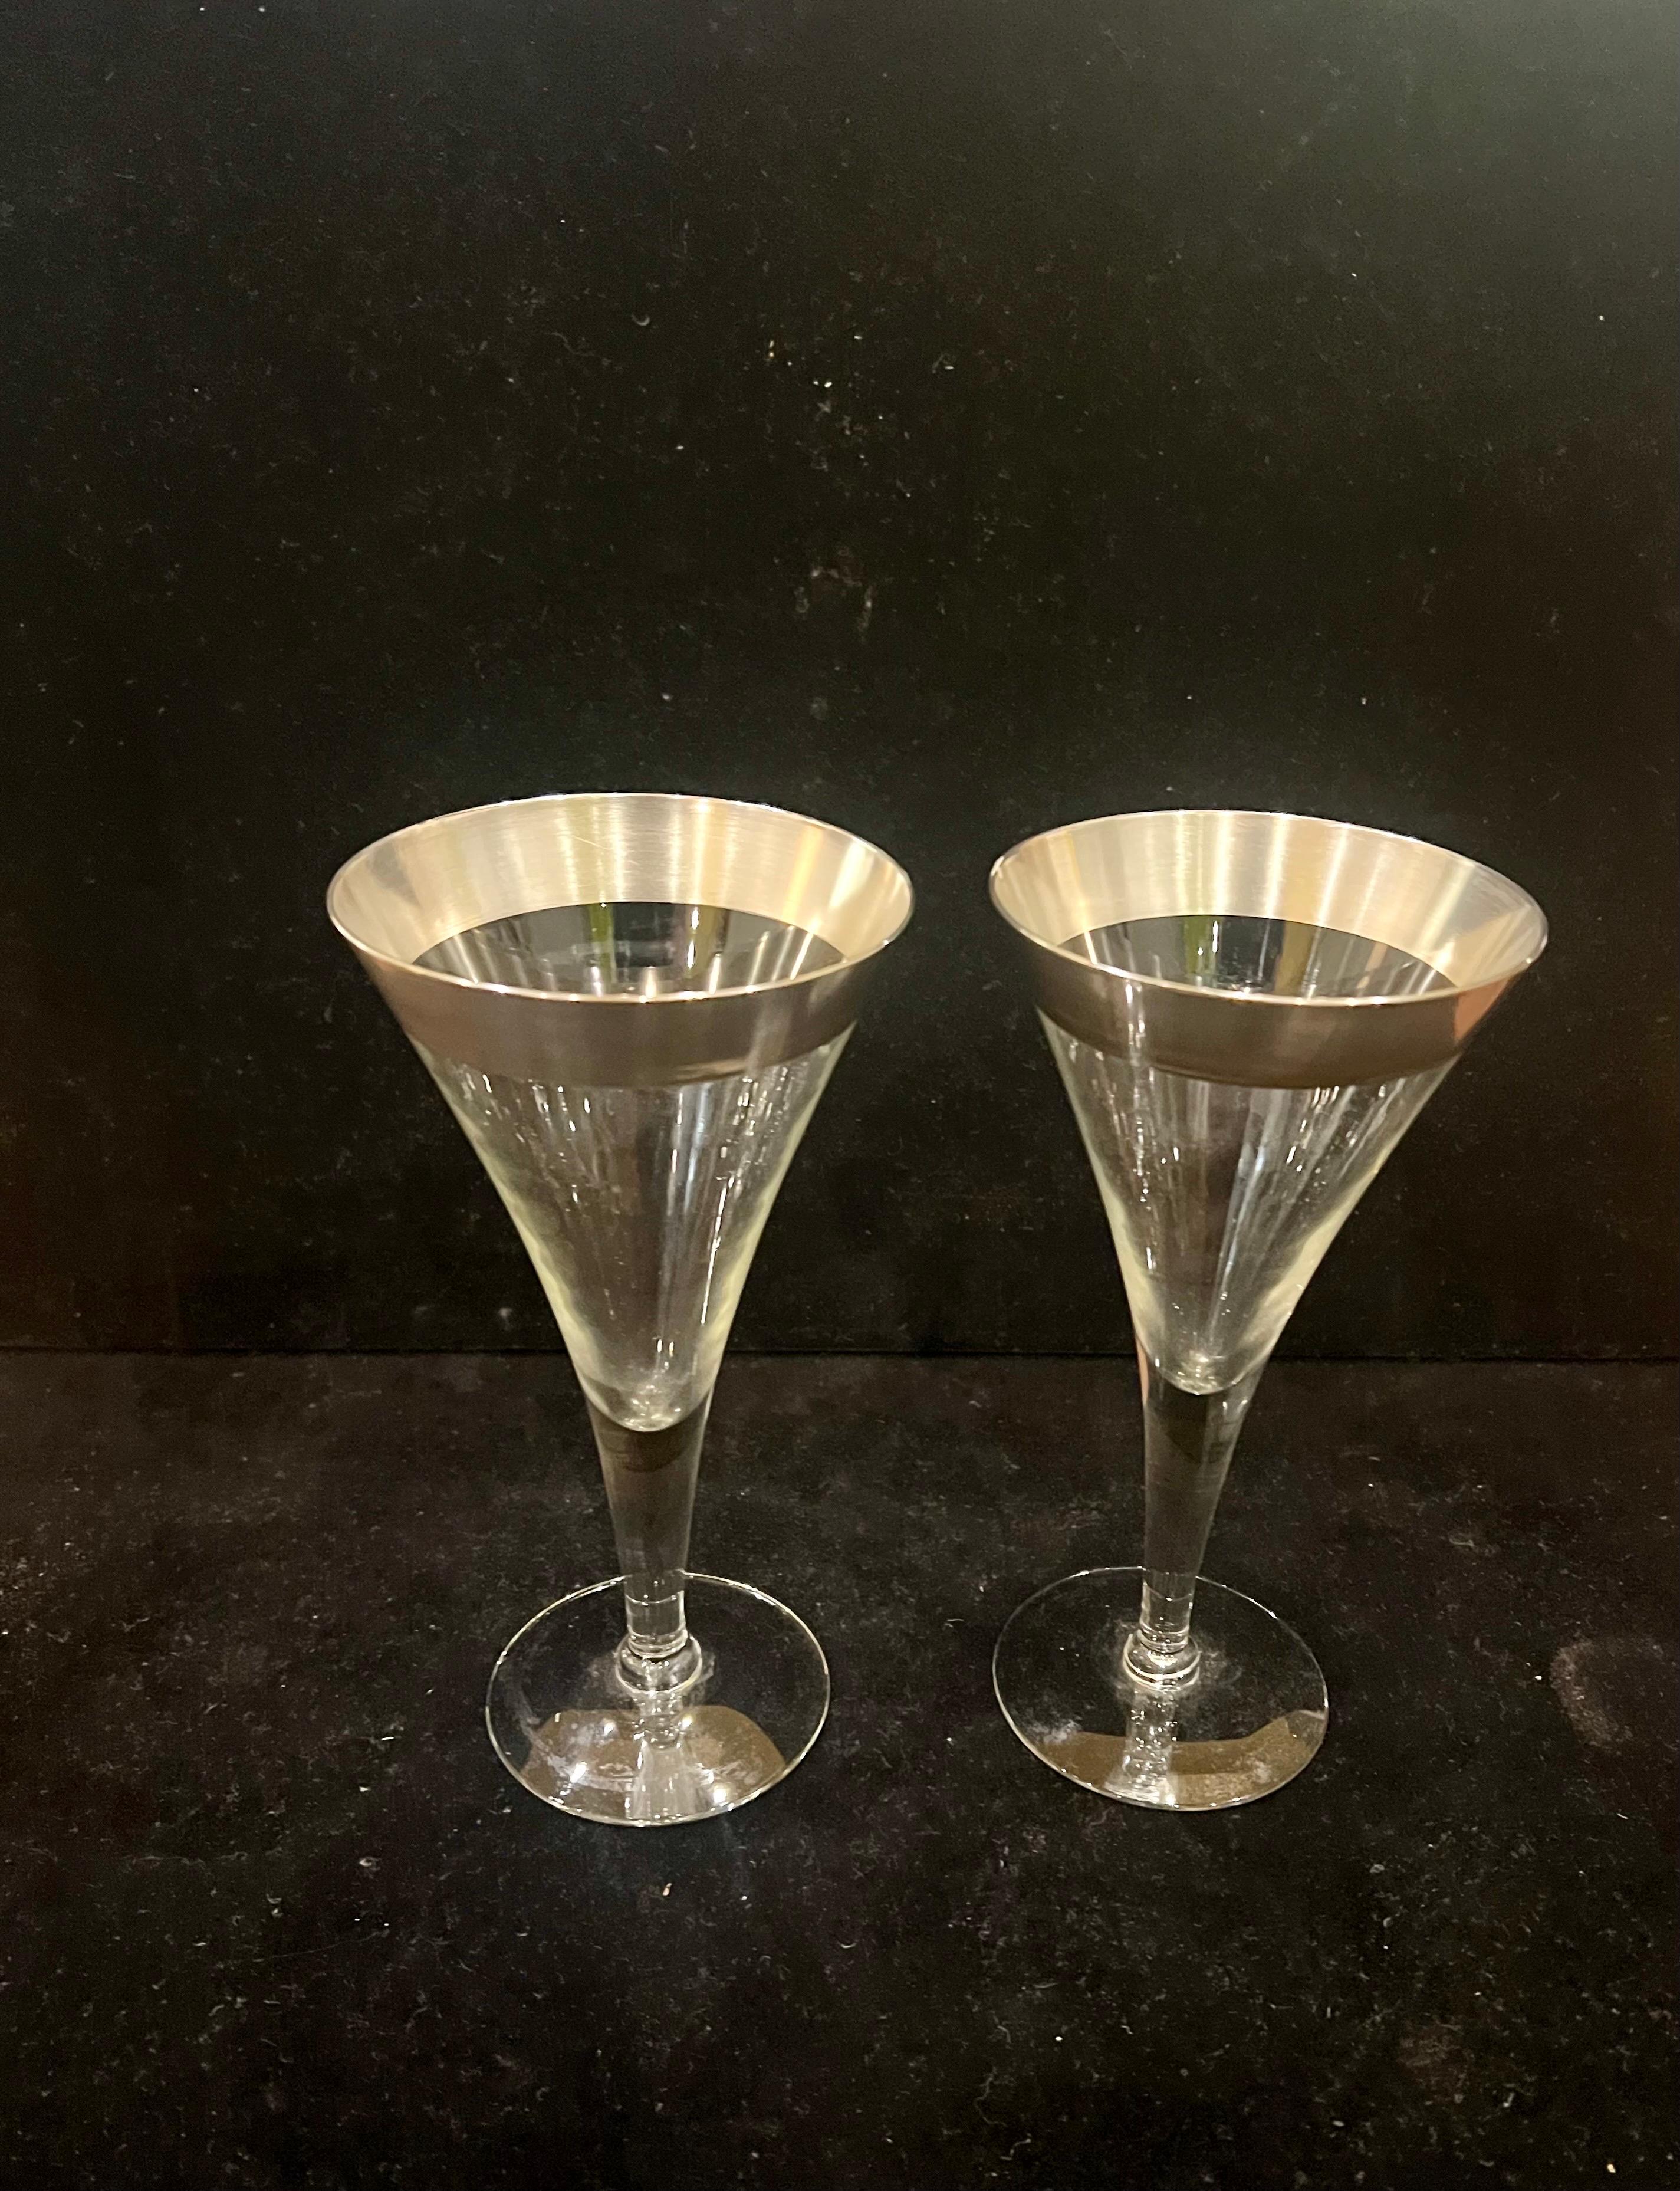 Elegant pair of wine glasses by Dorothy Thorpe design, with pure silver ring in excellent condition.